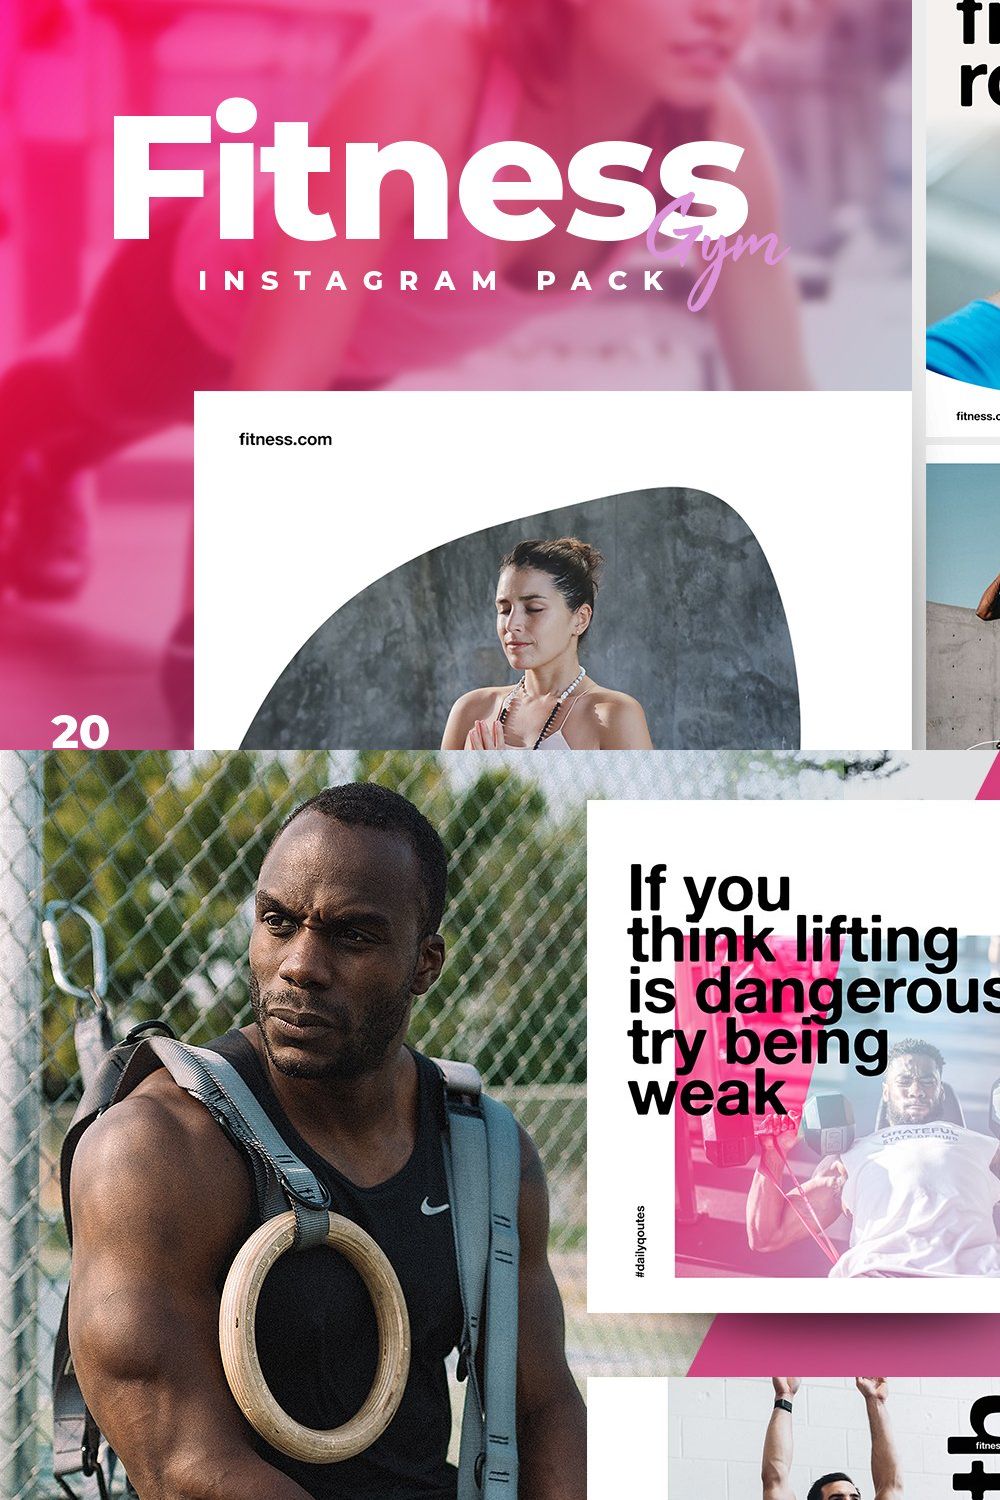 Fitness & Gym instagram 4.0 pinterest preview image.